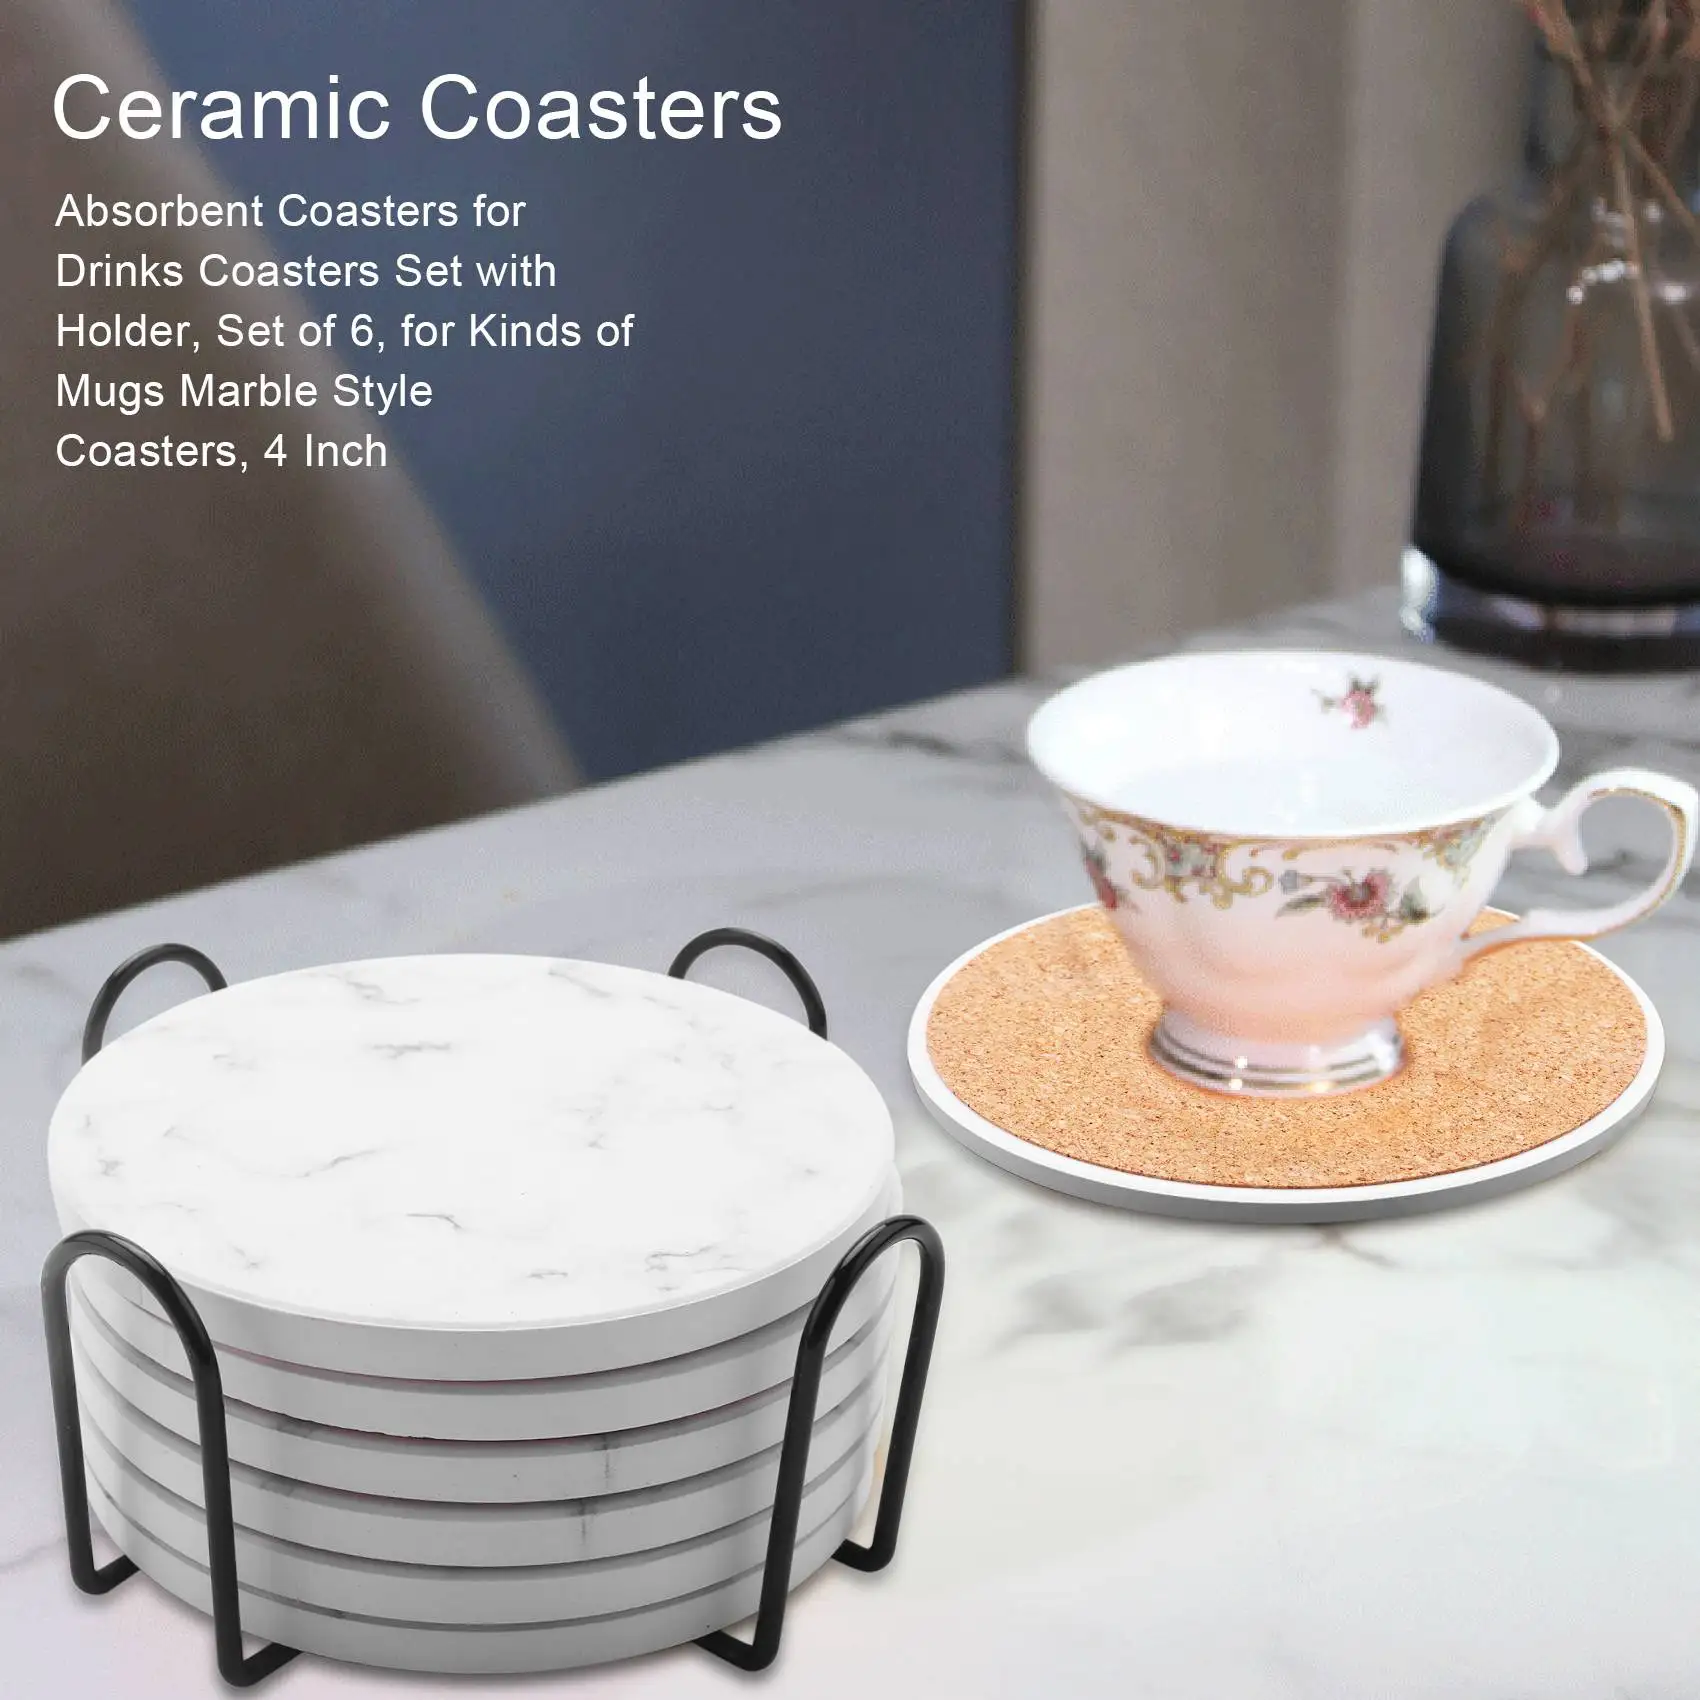 Absorbent Coasters for Drinks Coasters Set with Holder, Set of 6, for Kinds of Mugs Marble Style Coasters, 4 Inch